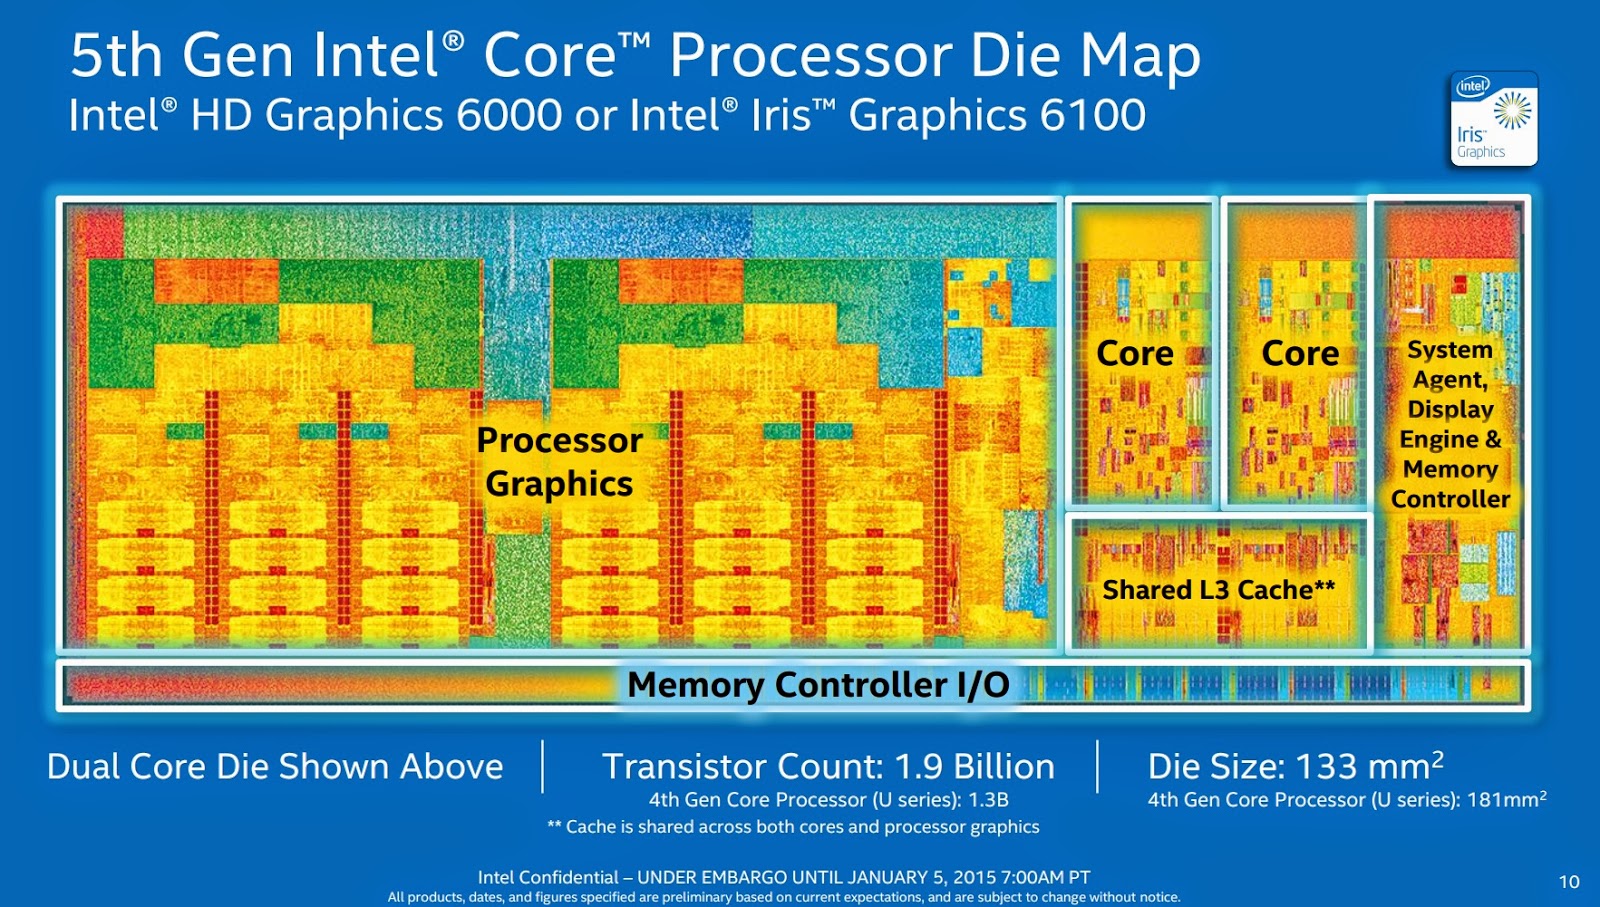 Intel unveils new Broadwell chips bound for Appleâ€™s MacBook Pros and that rumored Retina Air